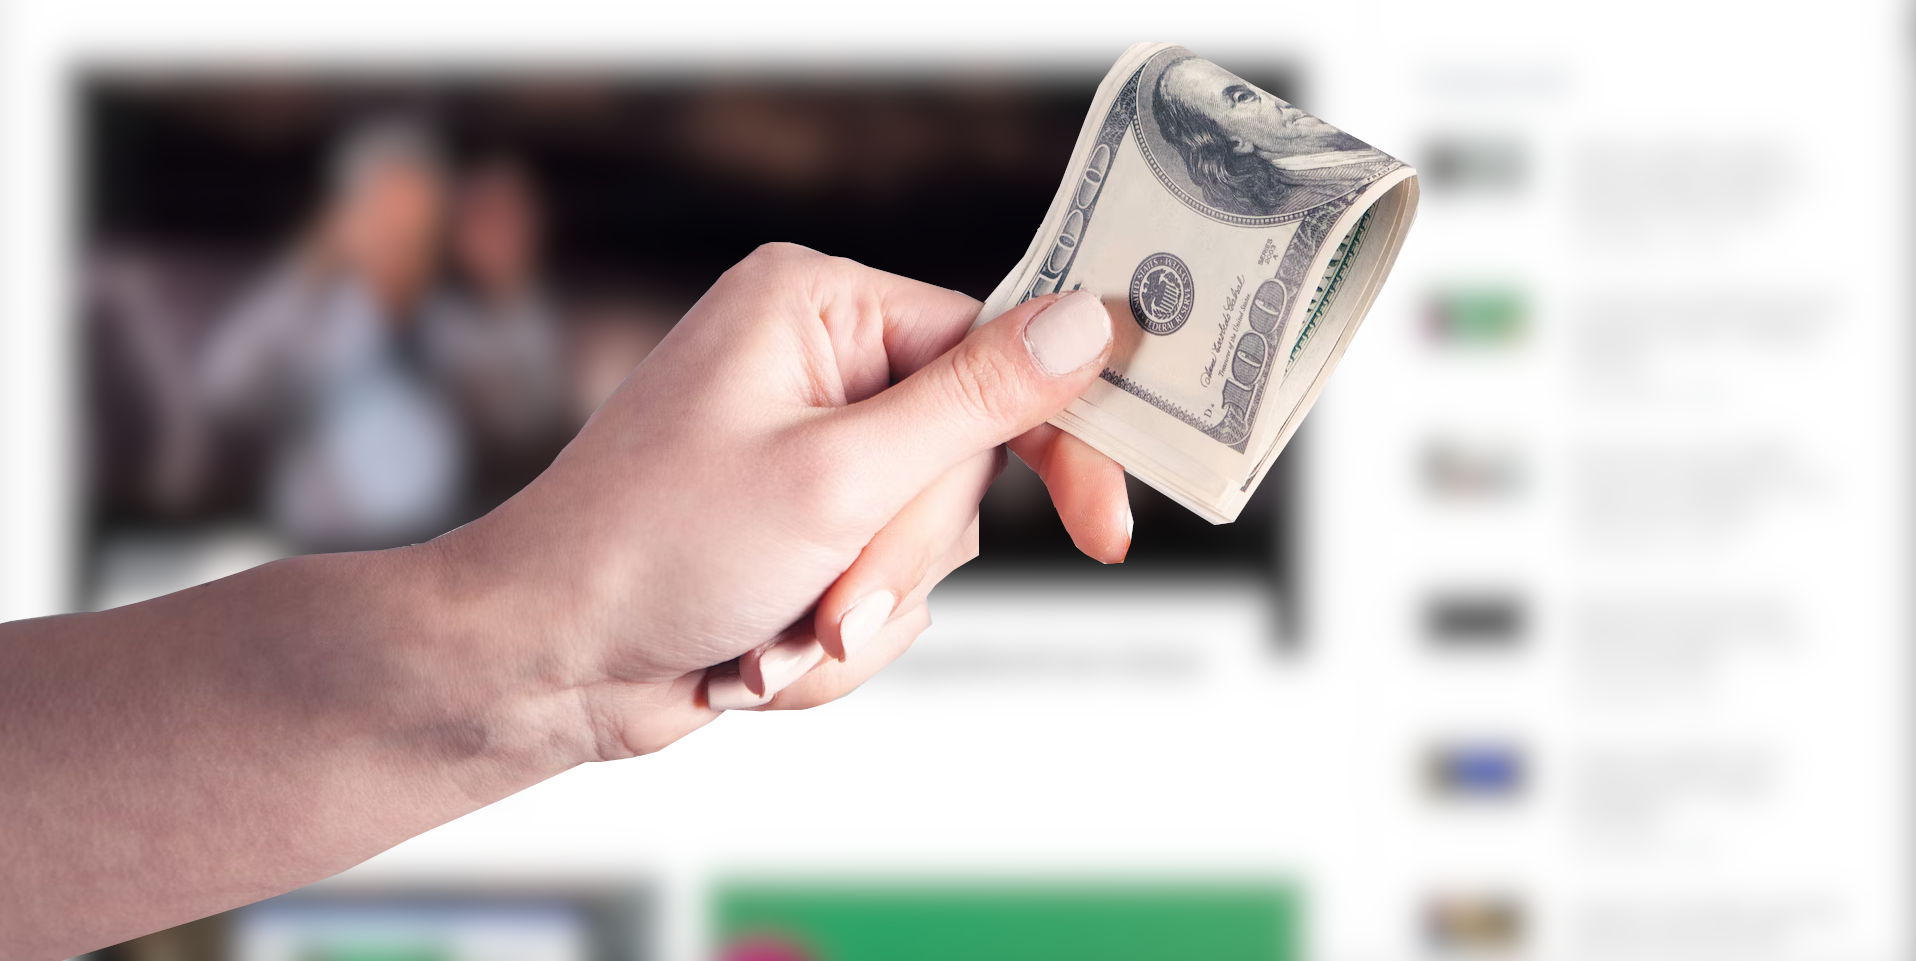 A hand holding folded money in front of a blurred web page